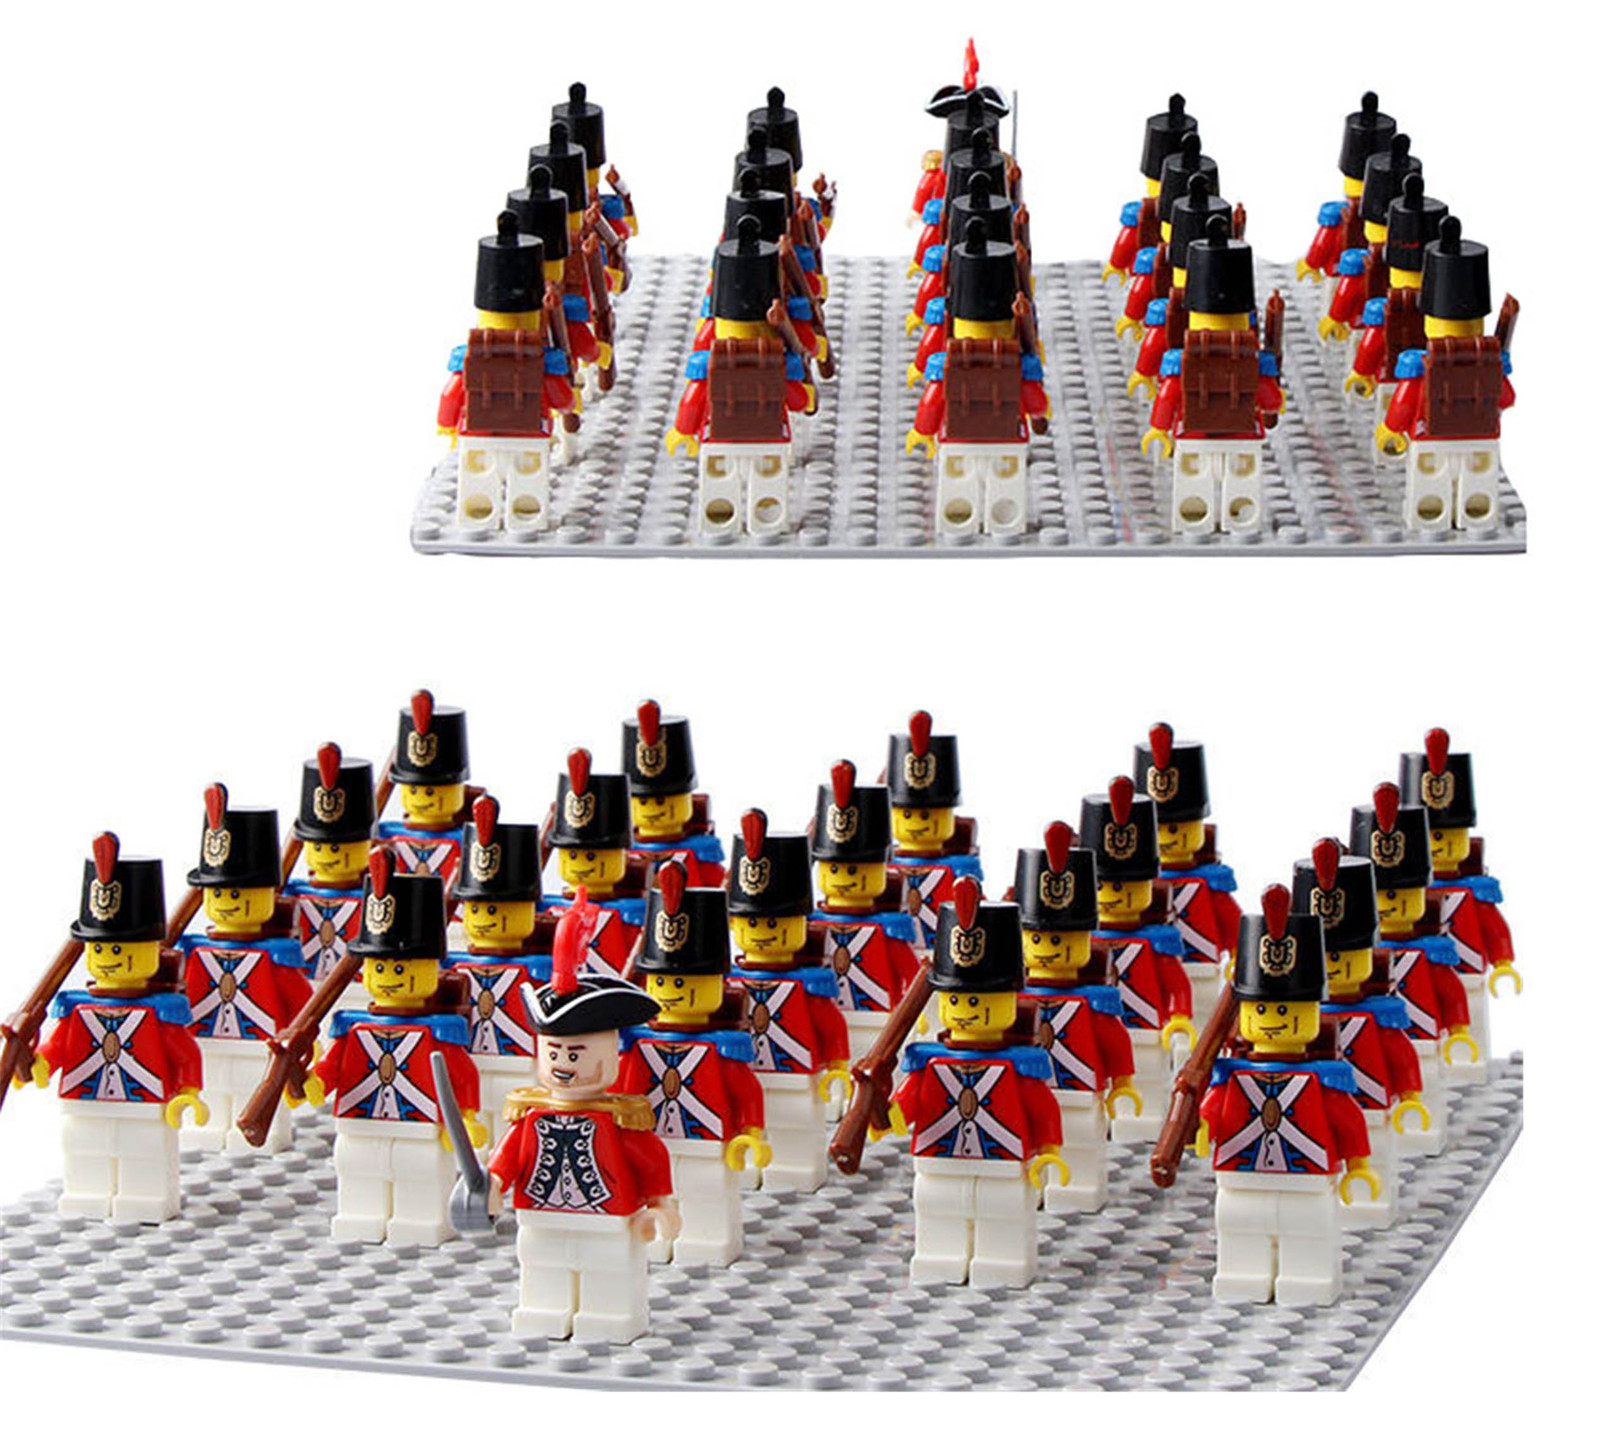 The American Revolutionary War British Redcoat infantry Army Set 21 Minifigures